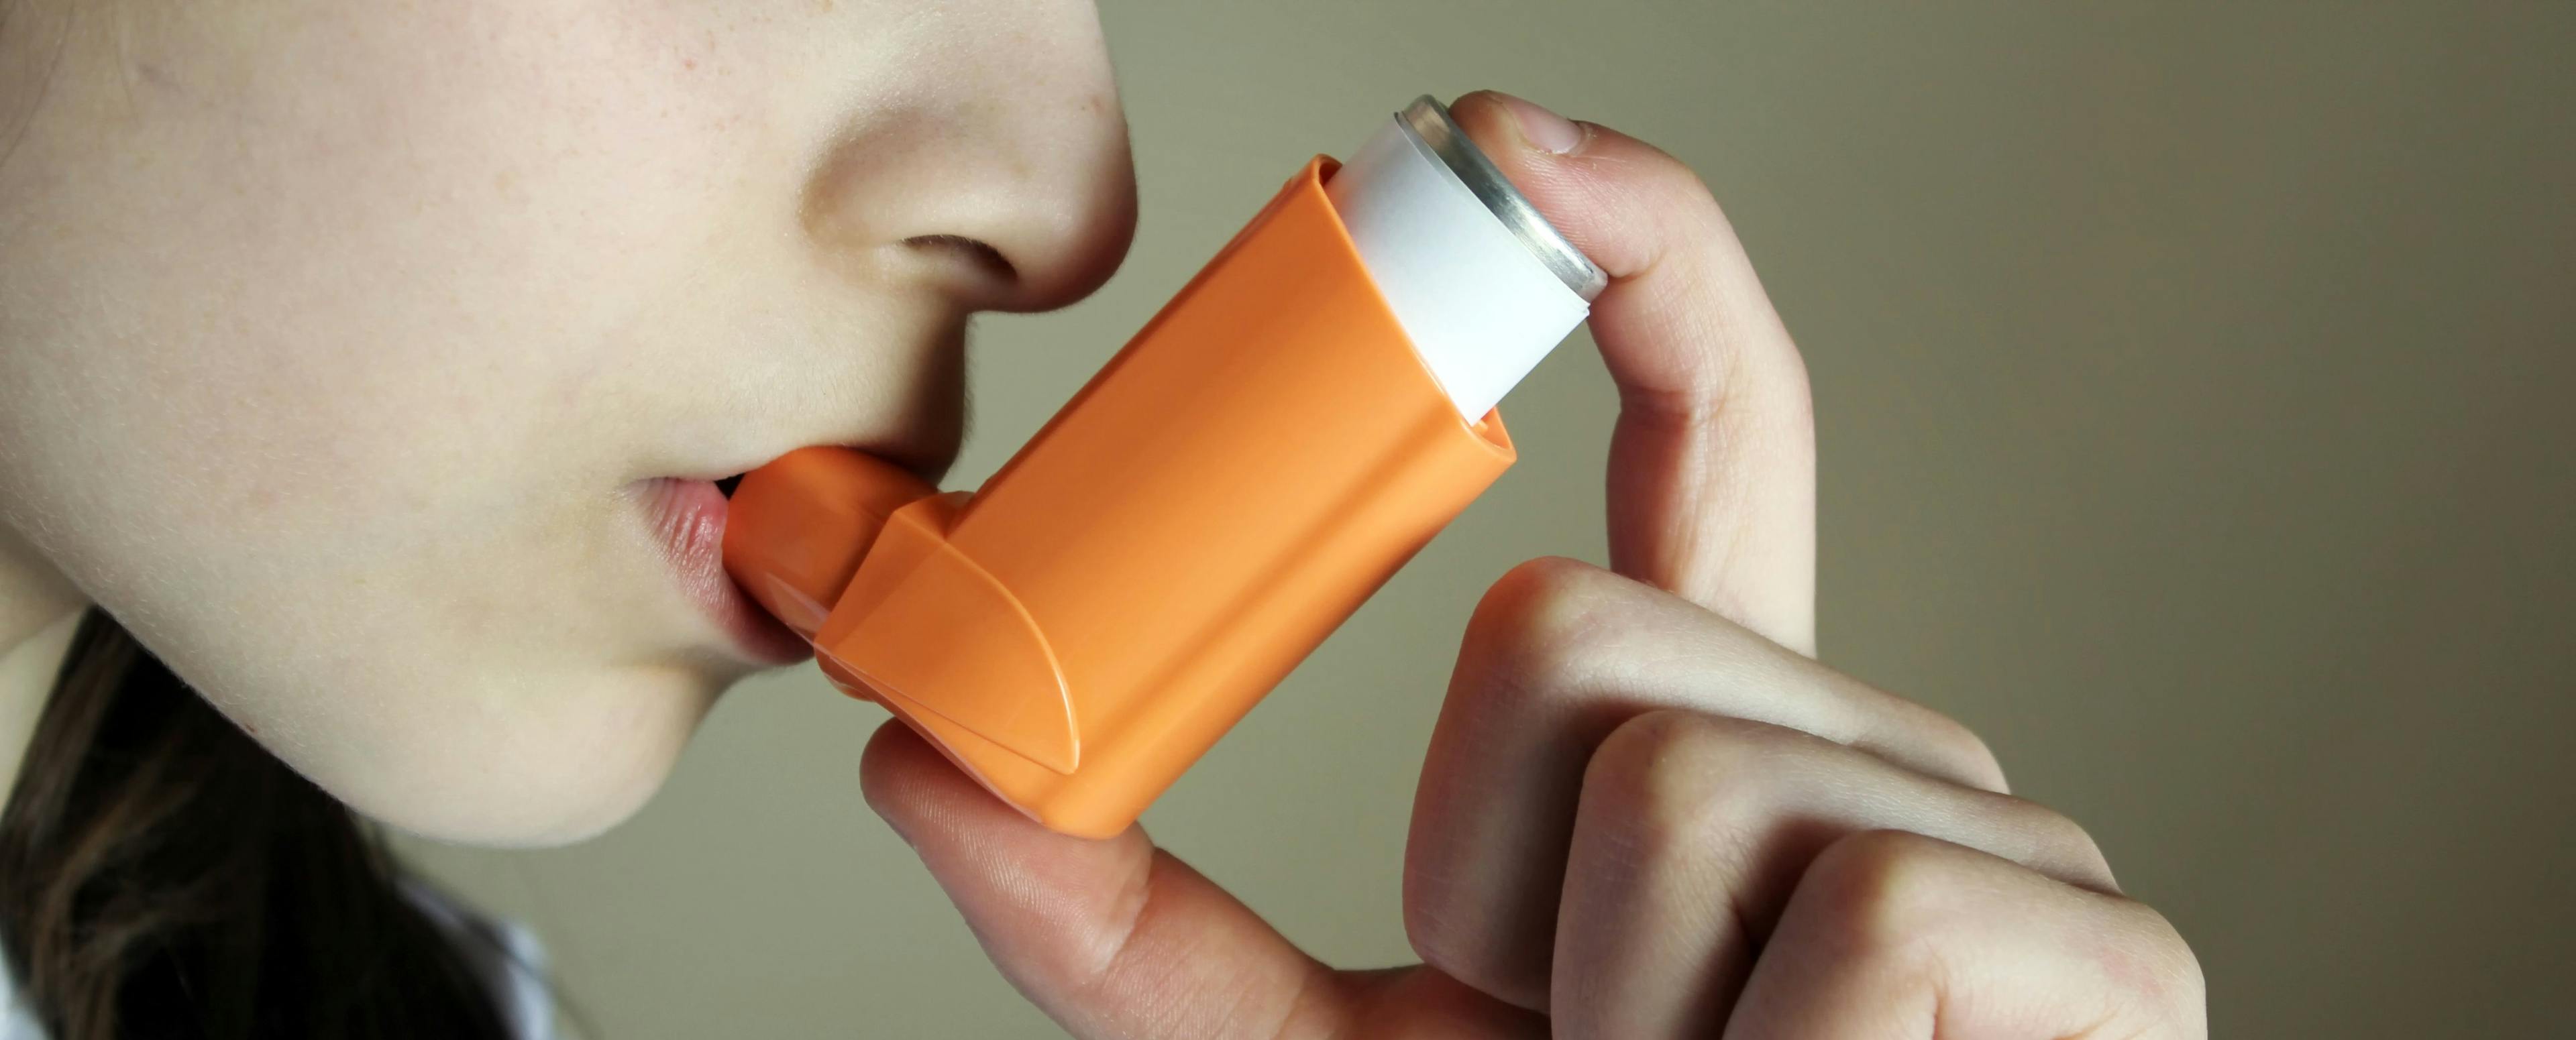 FDA Panel Recommends Asthma Treatment Approval for Adults Only